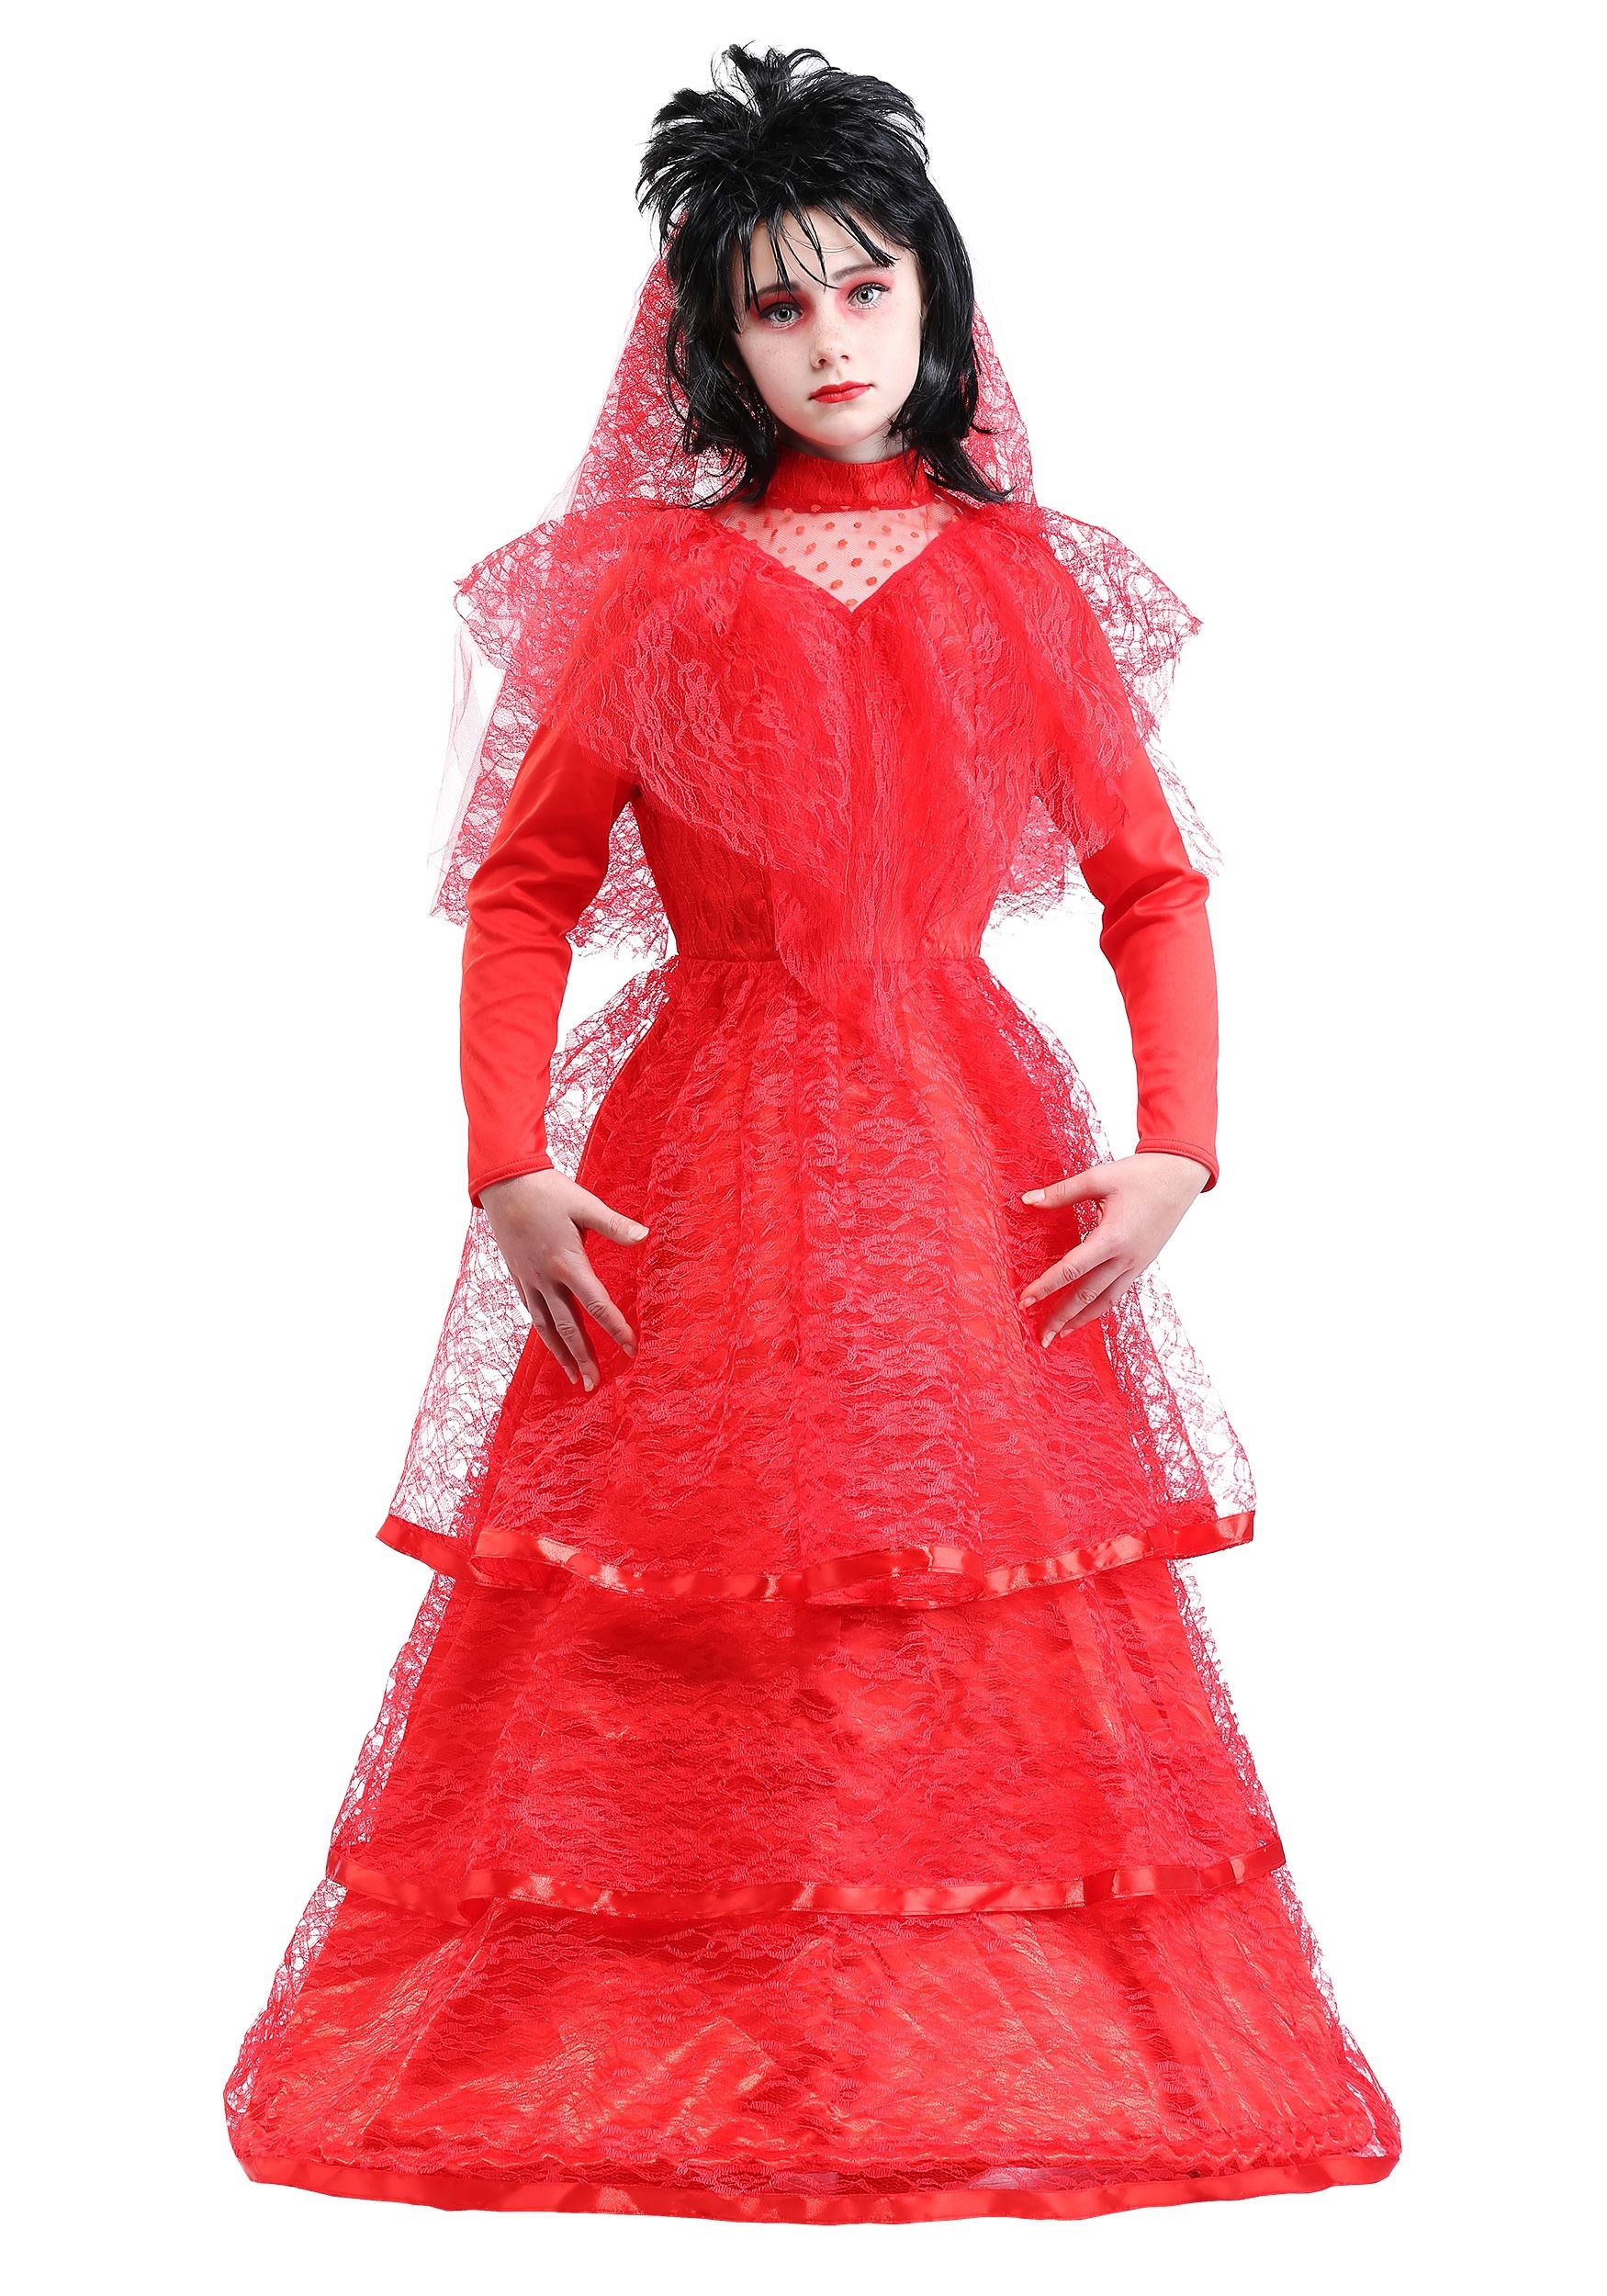 Red Gothic Wedding Dress Costume for Kids